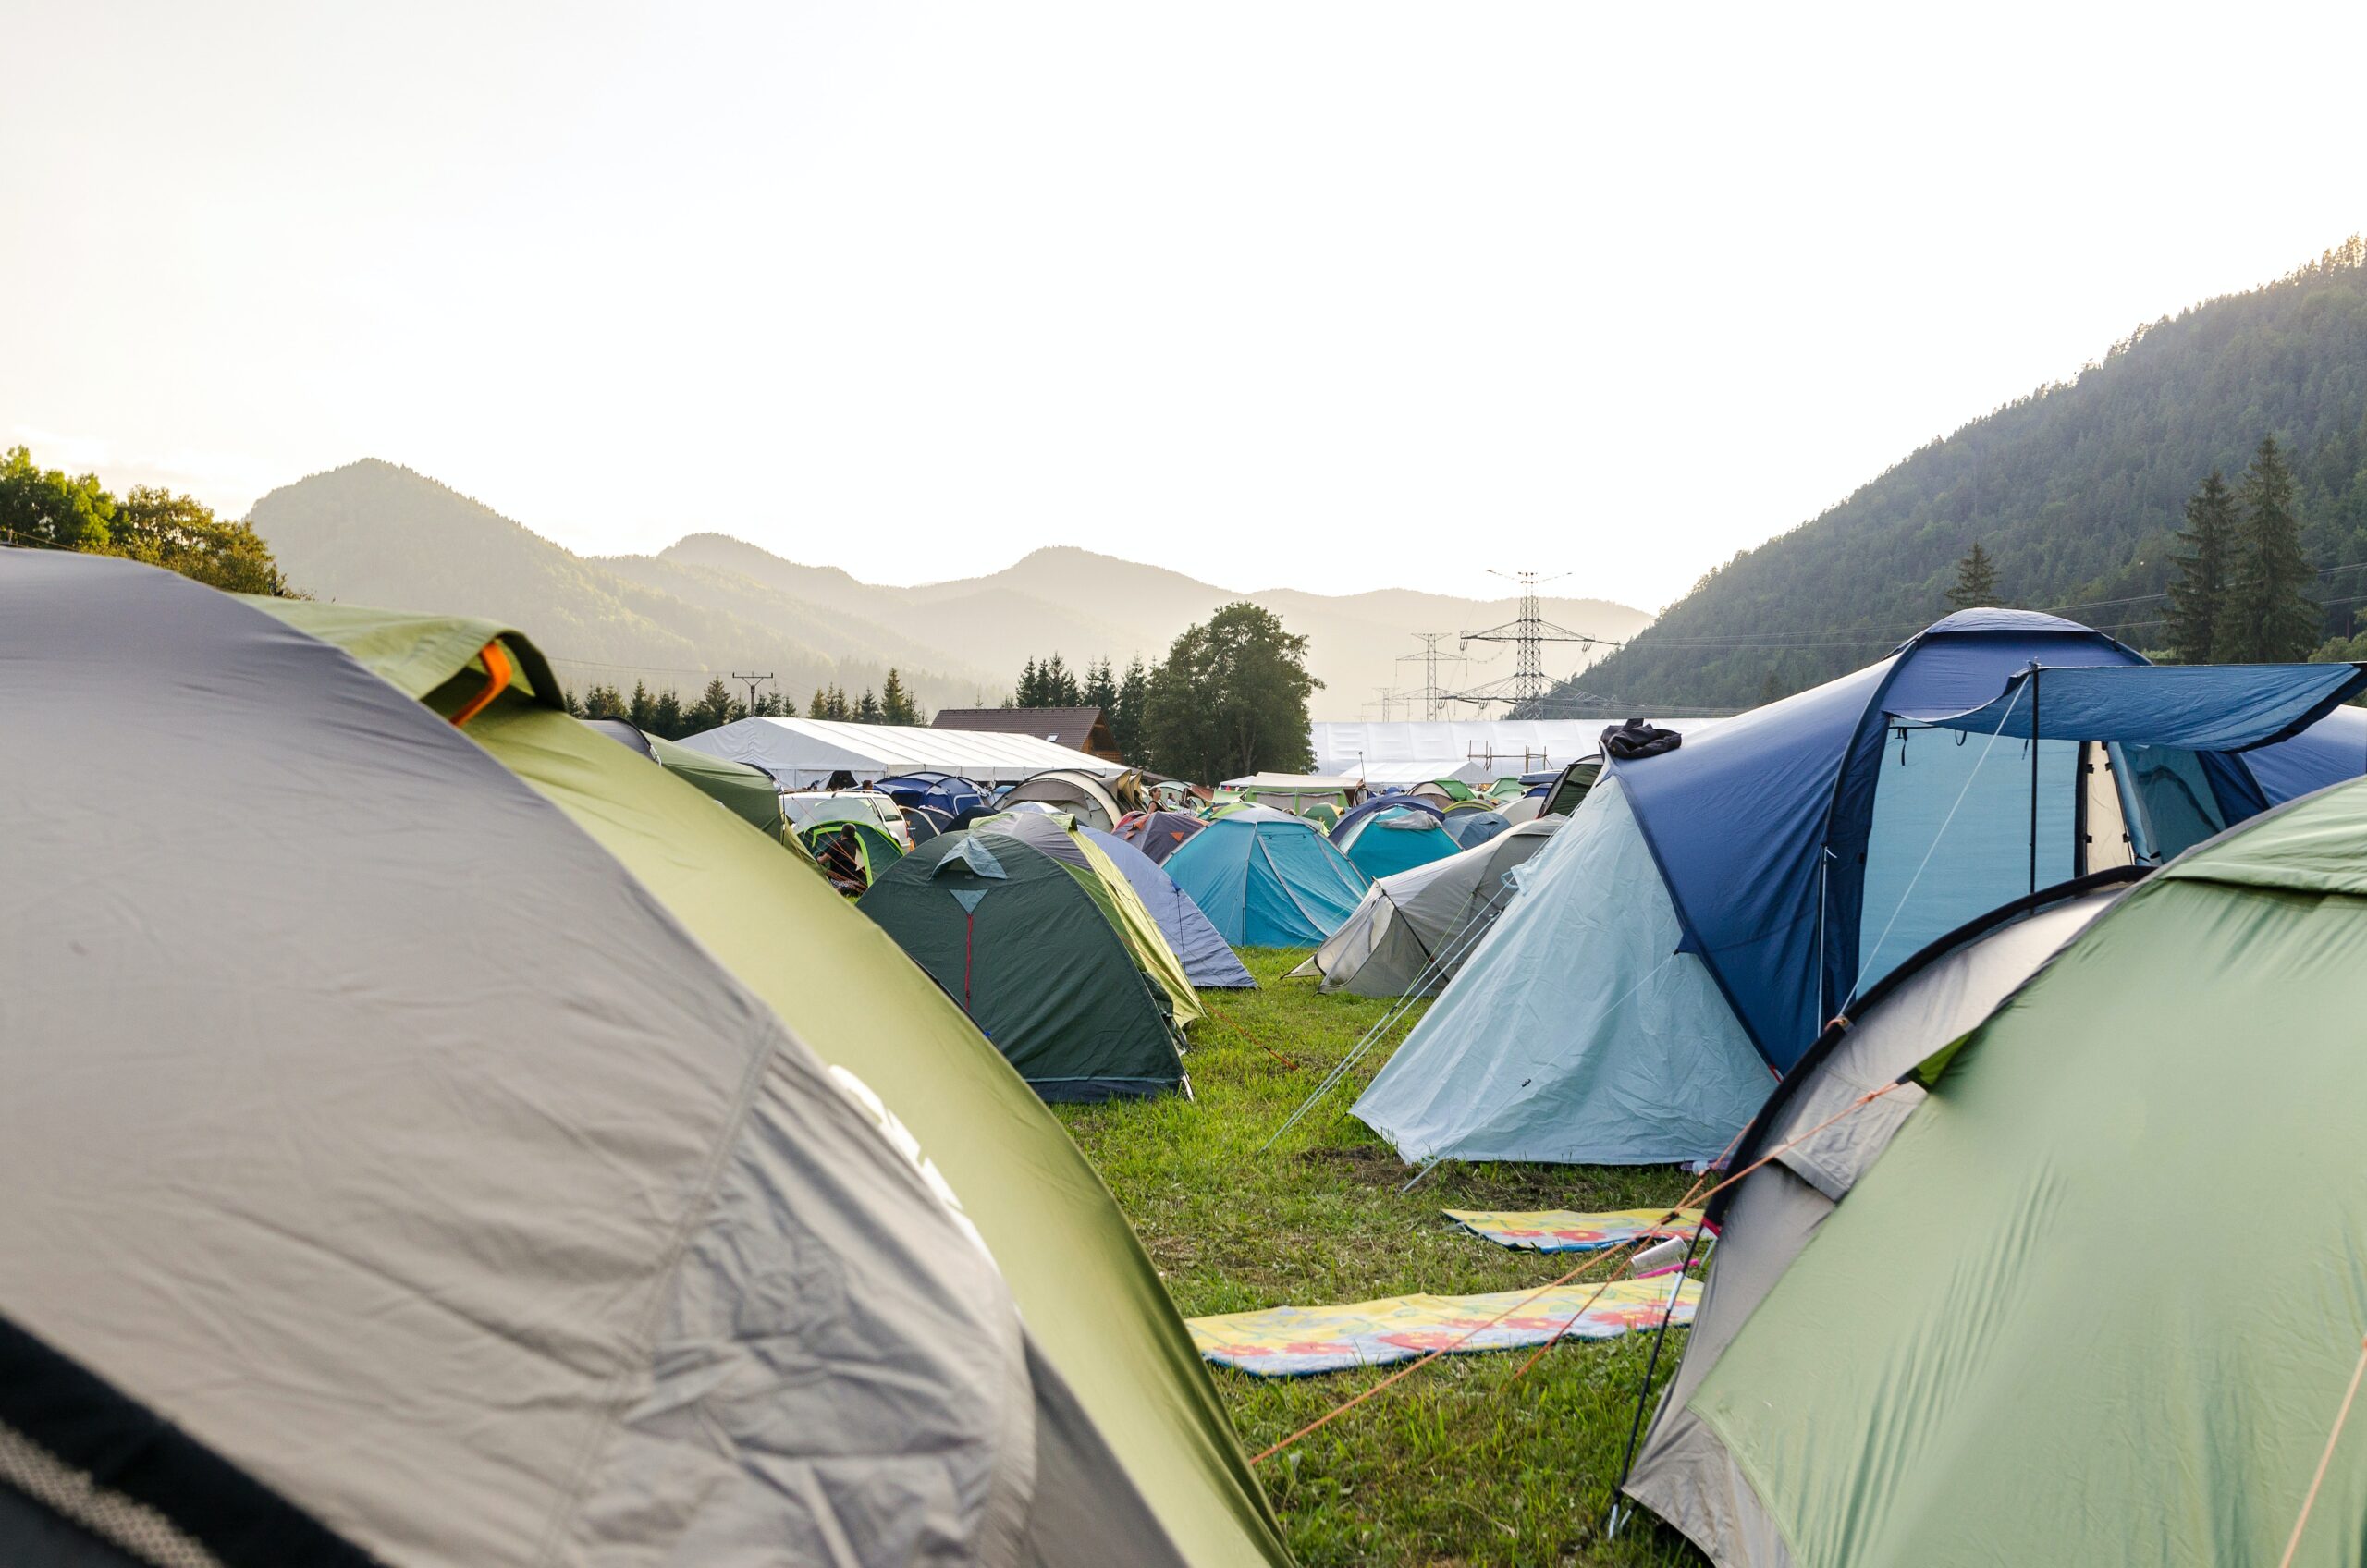 Tent Security Tips: 12 Ways To Stay Safe and Secure